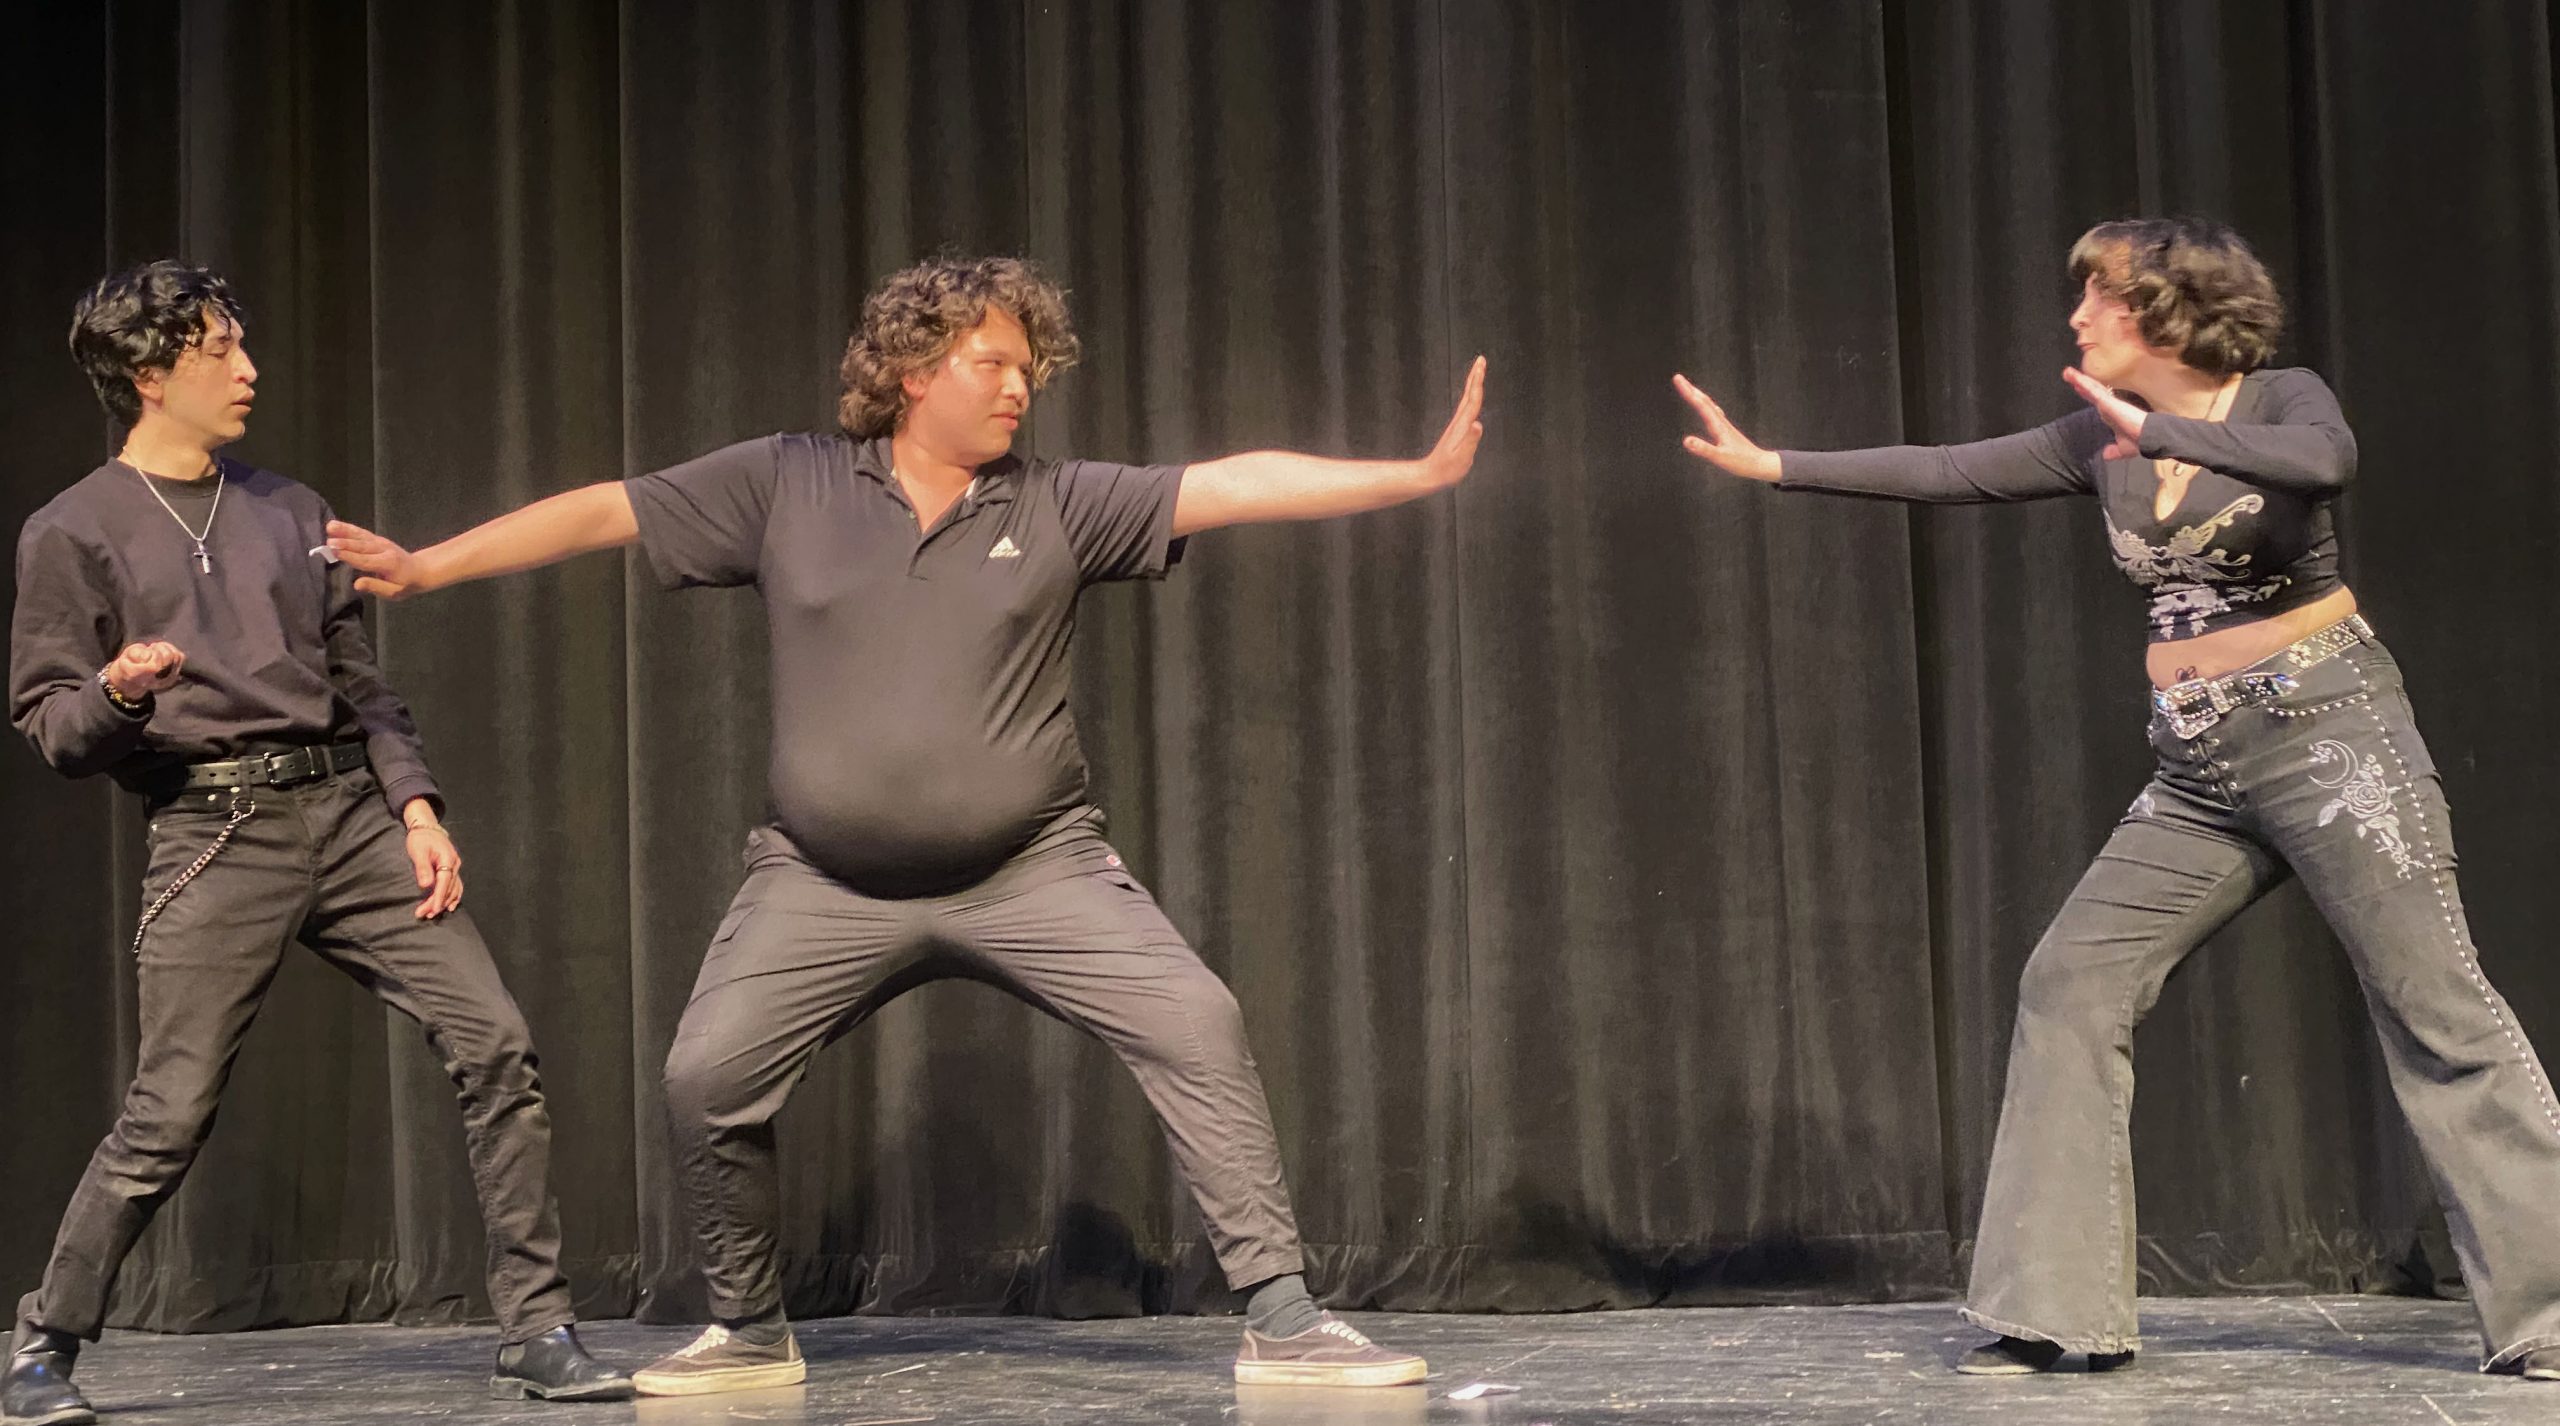 Improv troupe hosted performance in Finley Theater